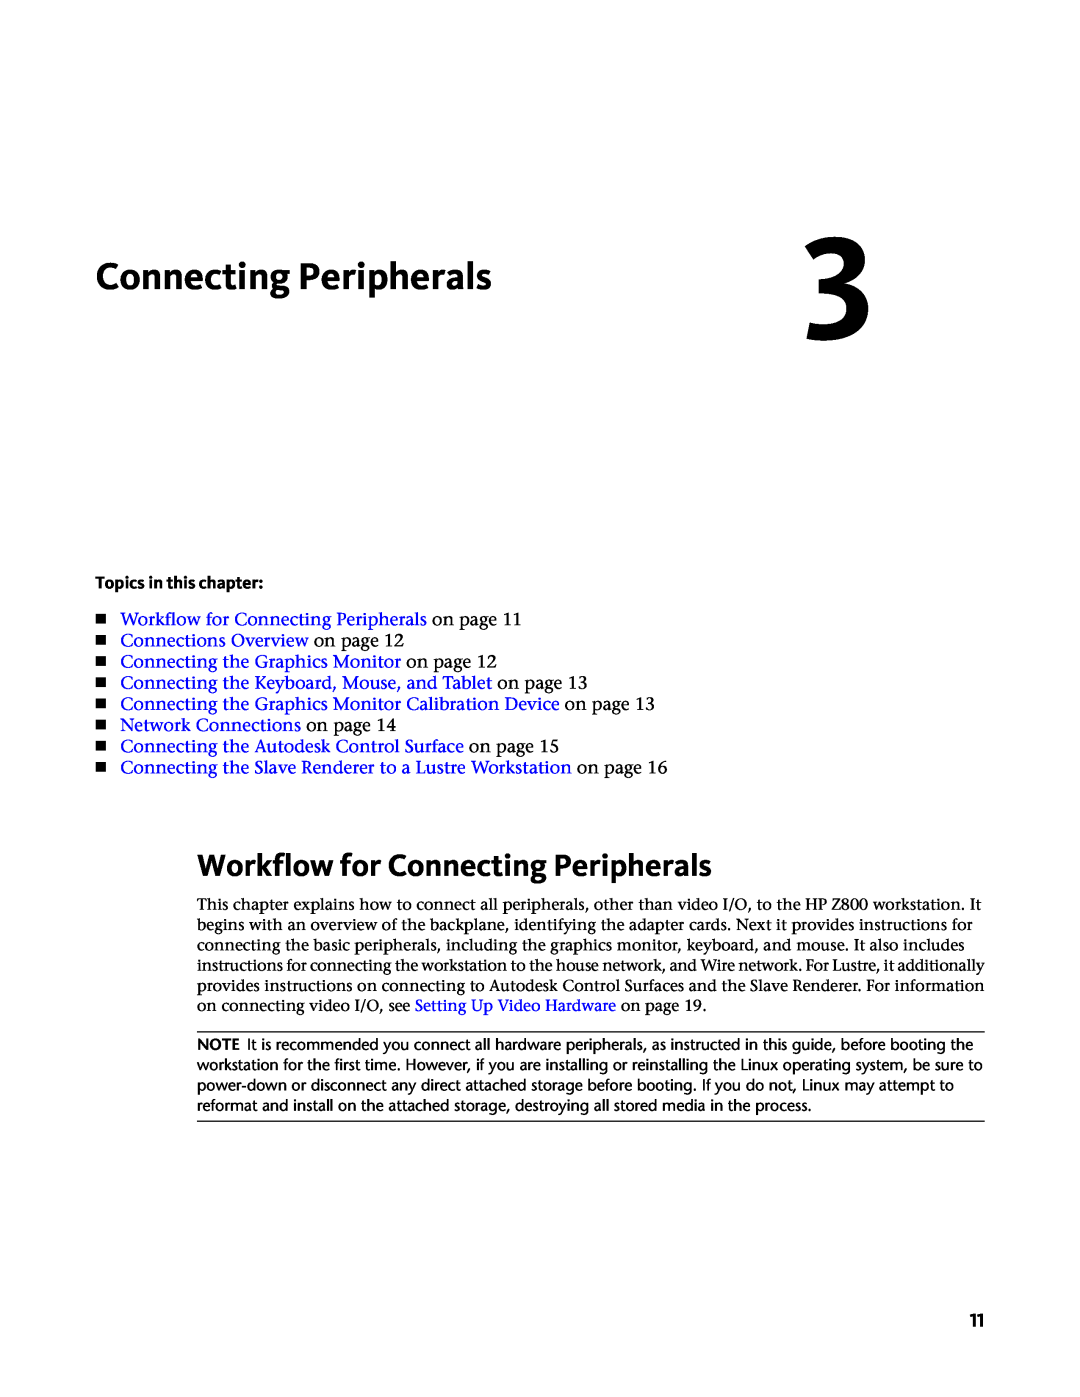 HP Z800 manual Workflow for Connecting Peripherals on page, Connecting the Keyboard, Mouse, and Tablet on page 